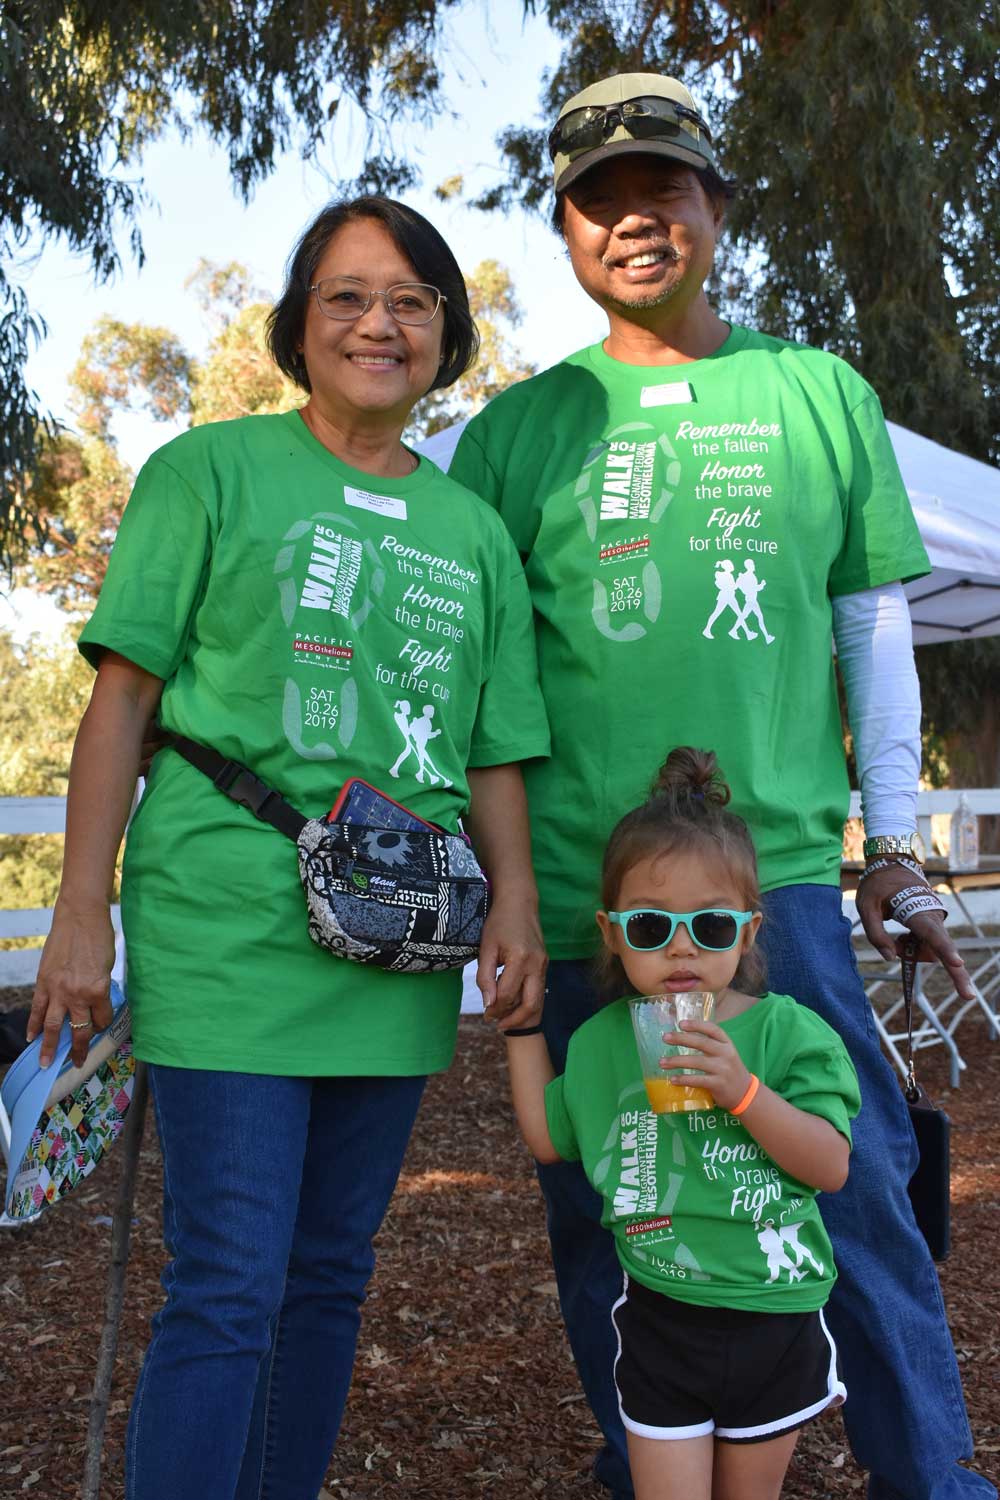 Photo of Team Frost Law Firm at the 8th Annual Mesothelioma Walk